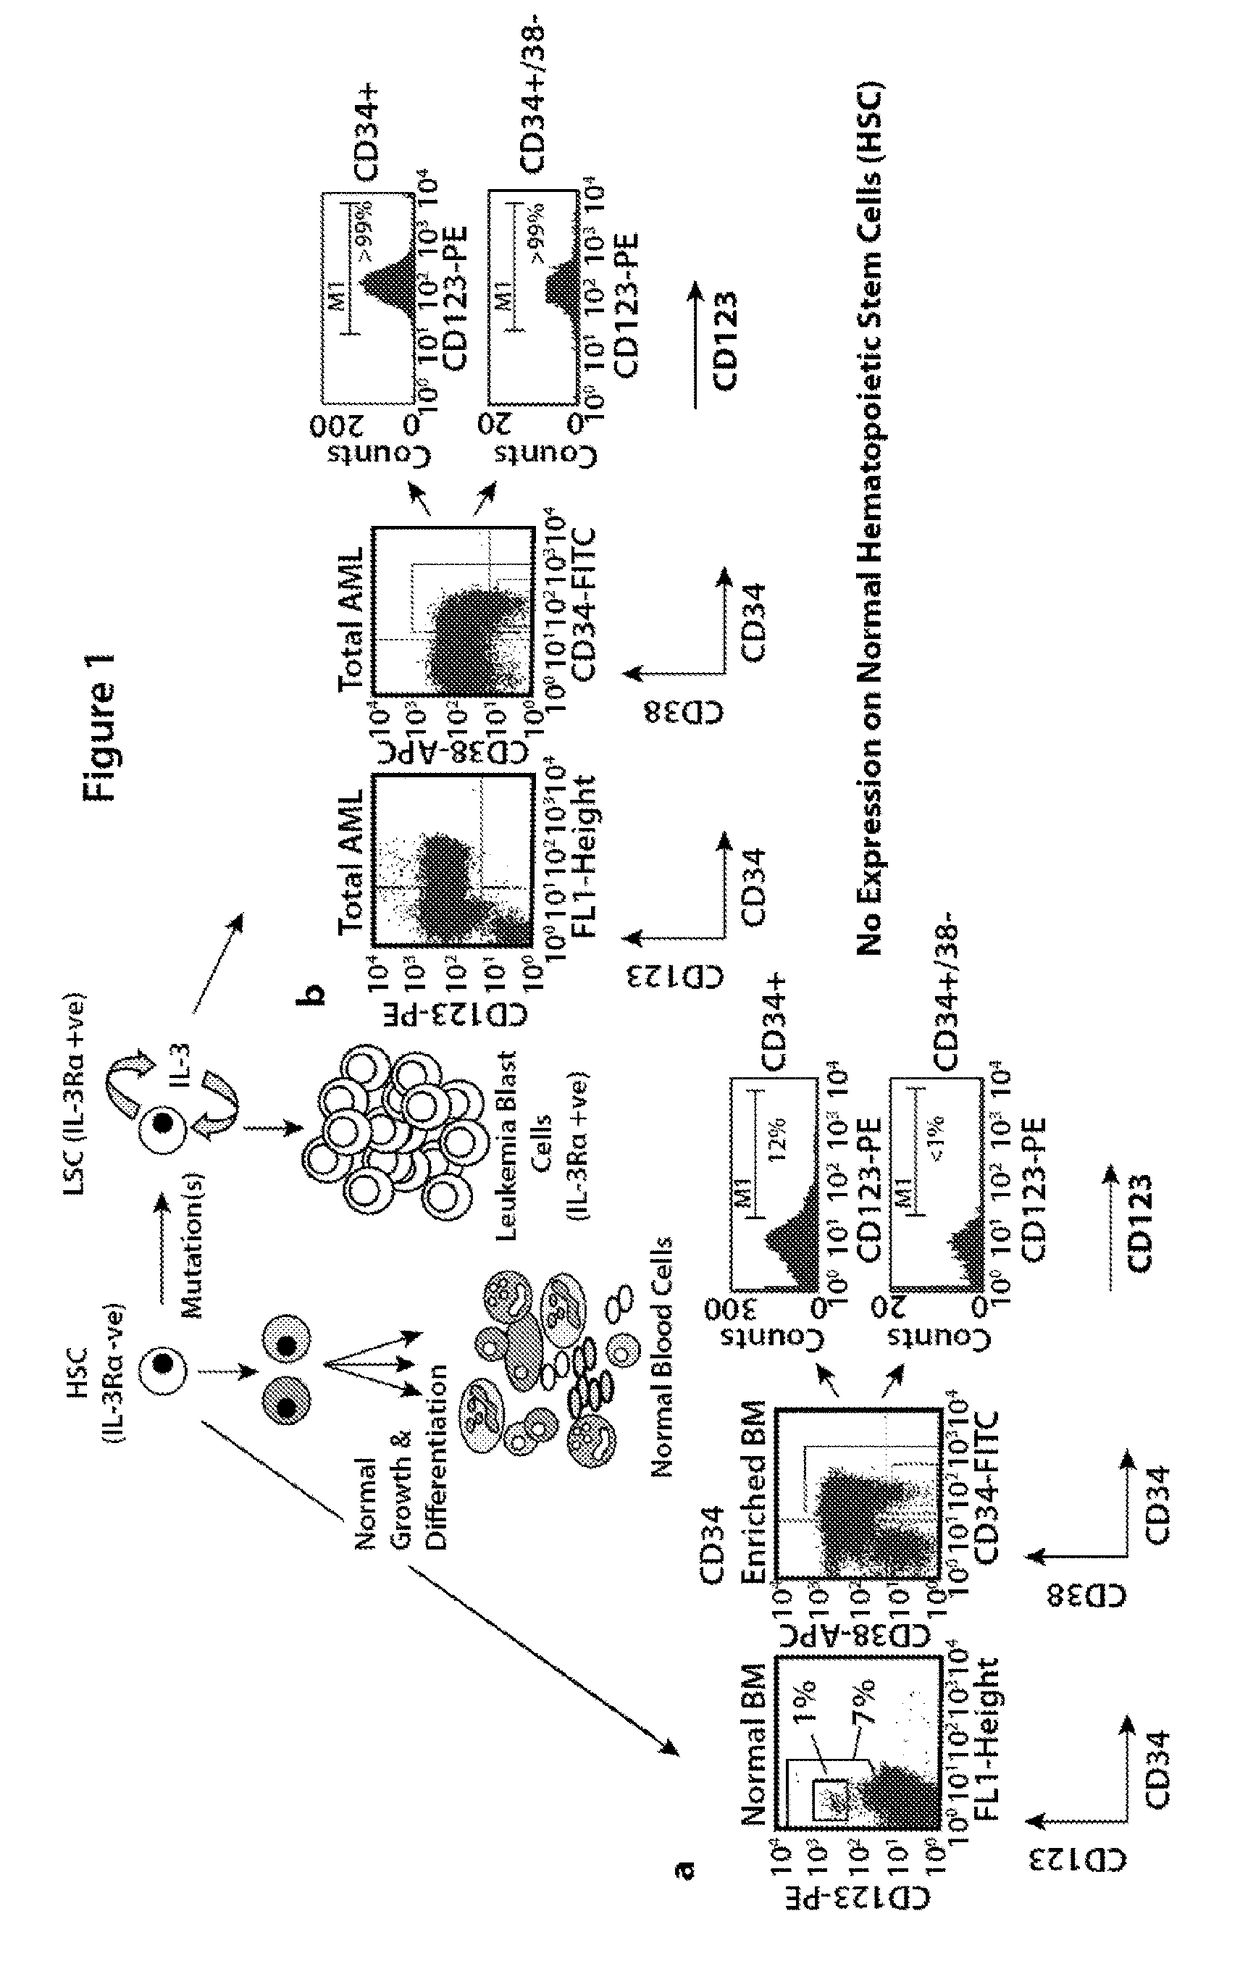 Bi-specific monovalent diabodies that are capable of binding CD123 and CD3, and uses thereof